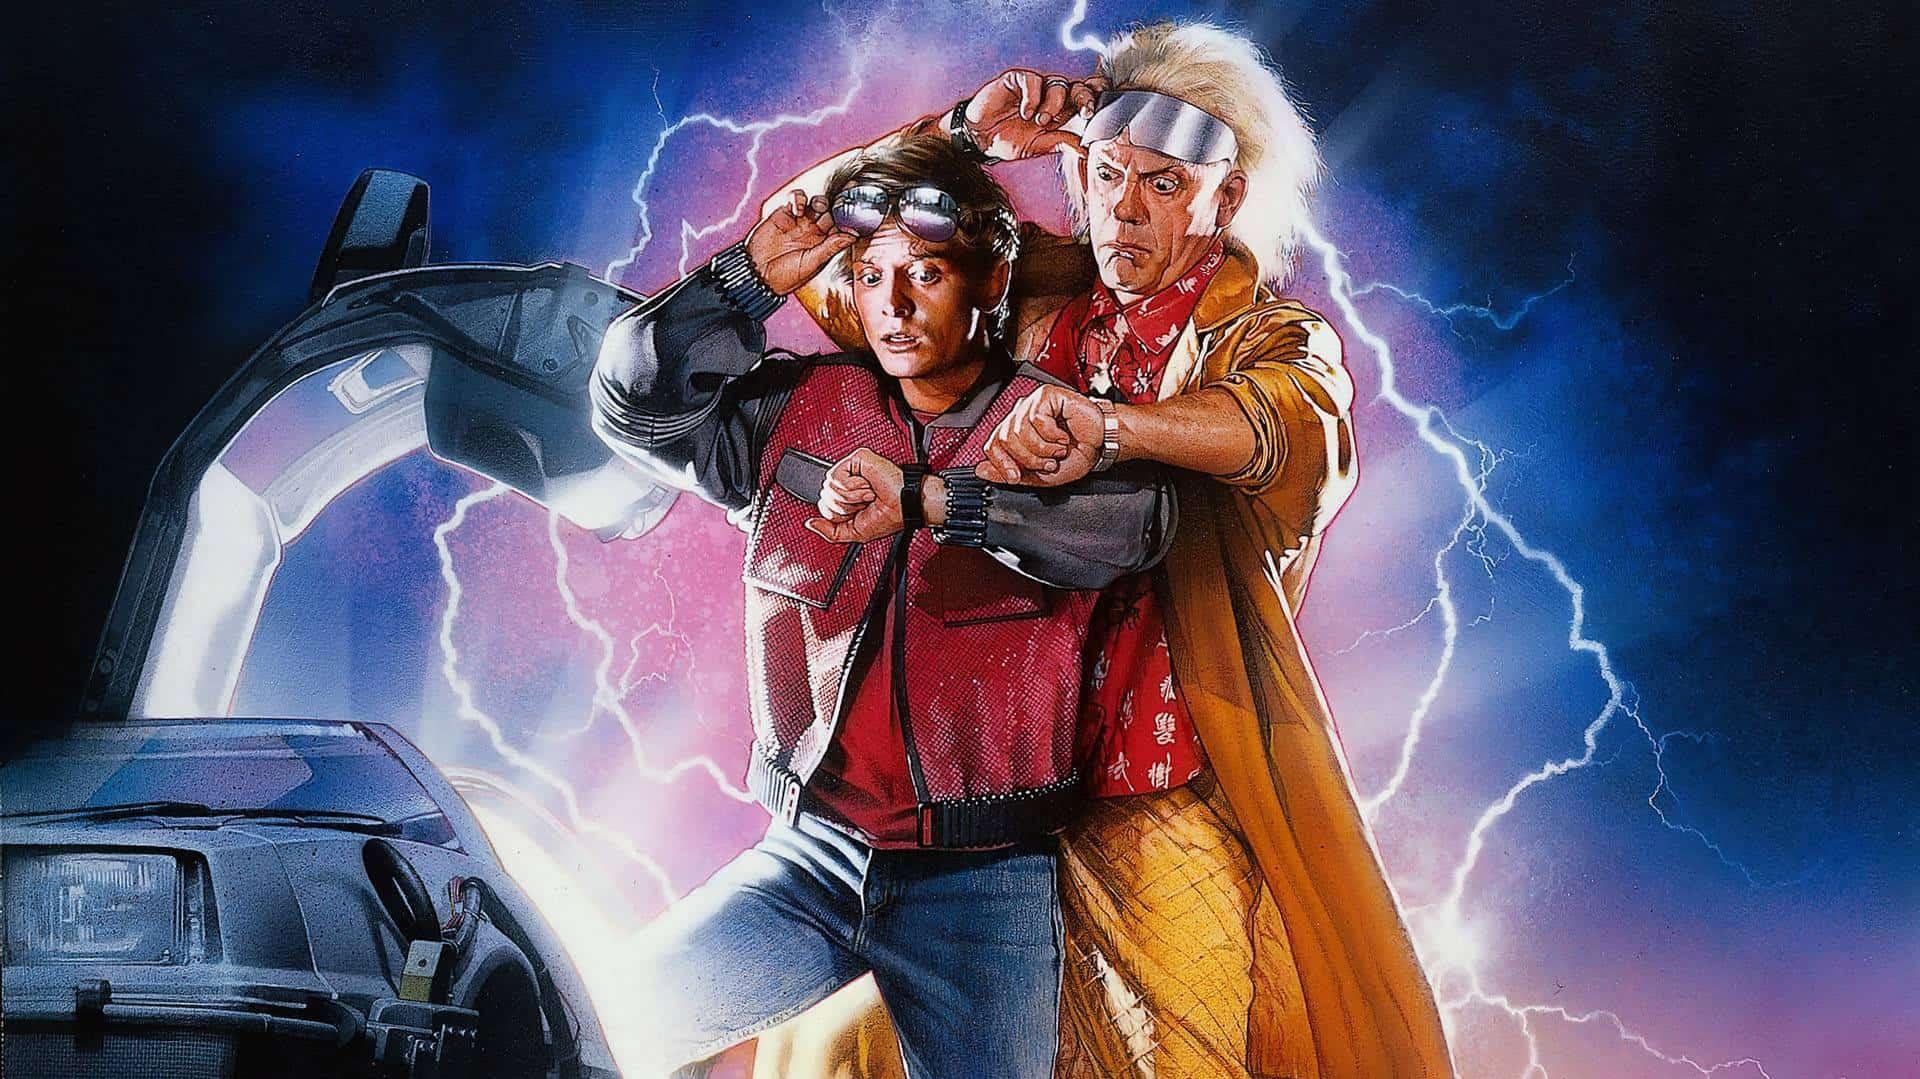 Back To The Future Part II and its initial backlash Film Stories